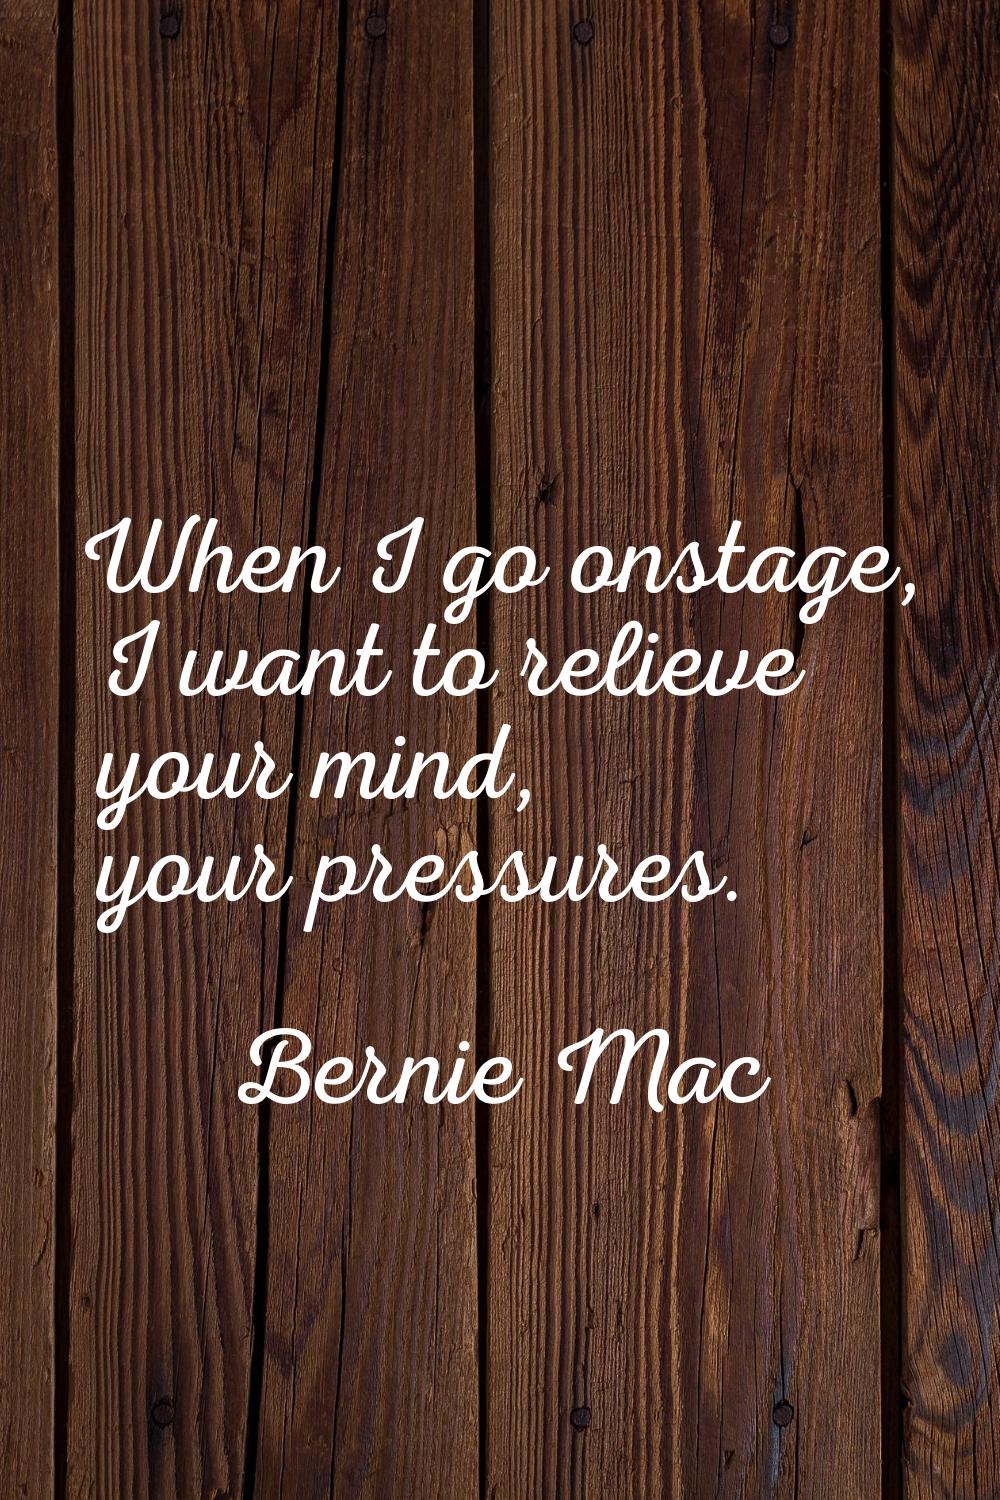 When I go onstage, I want to relieve your mind, your pressures.